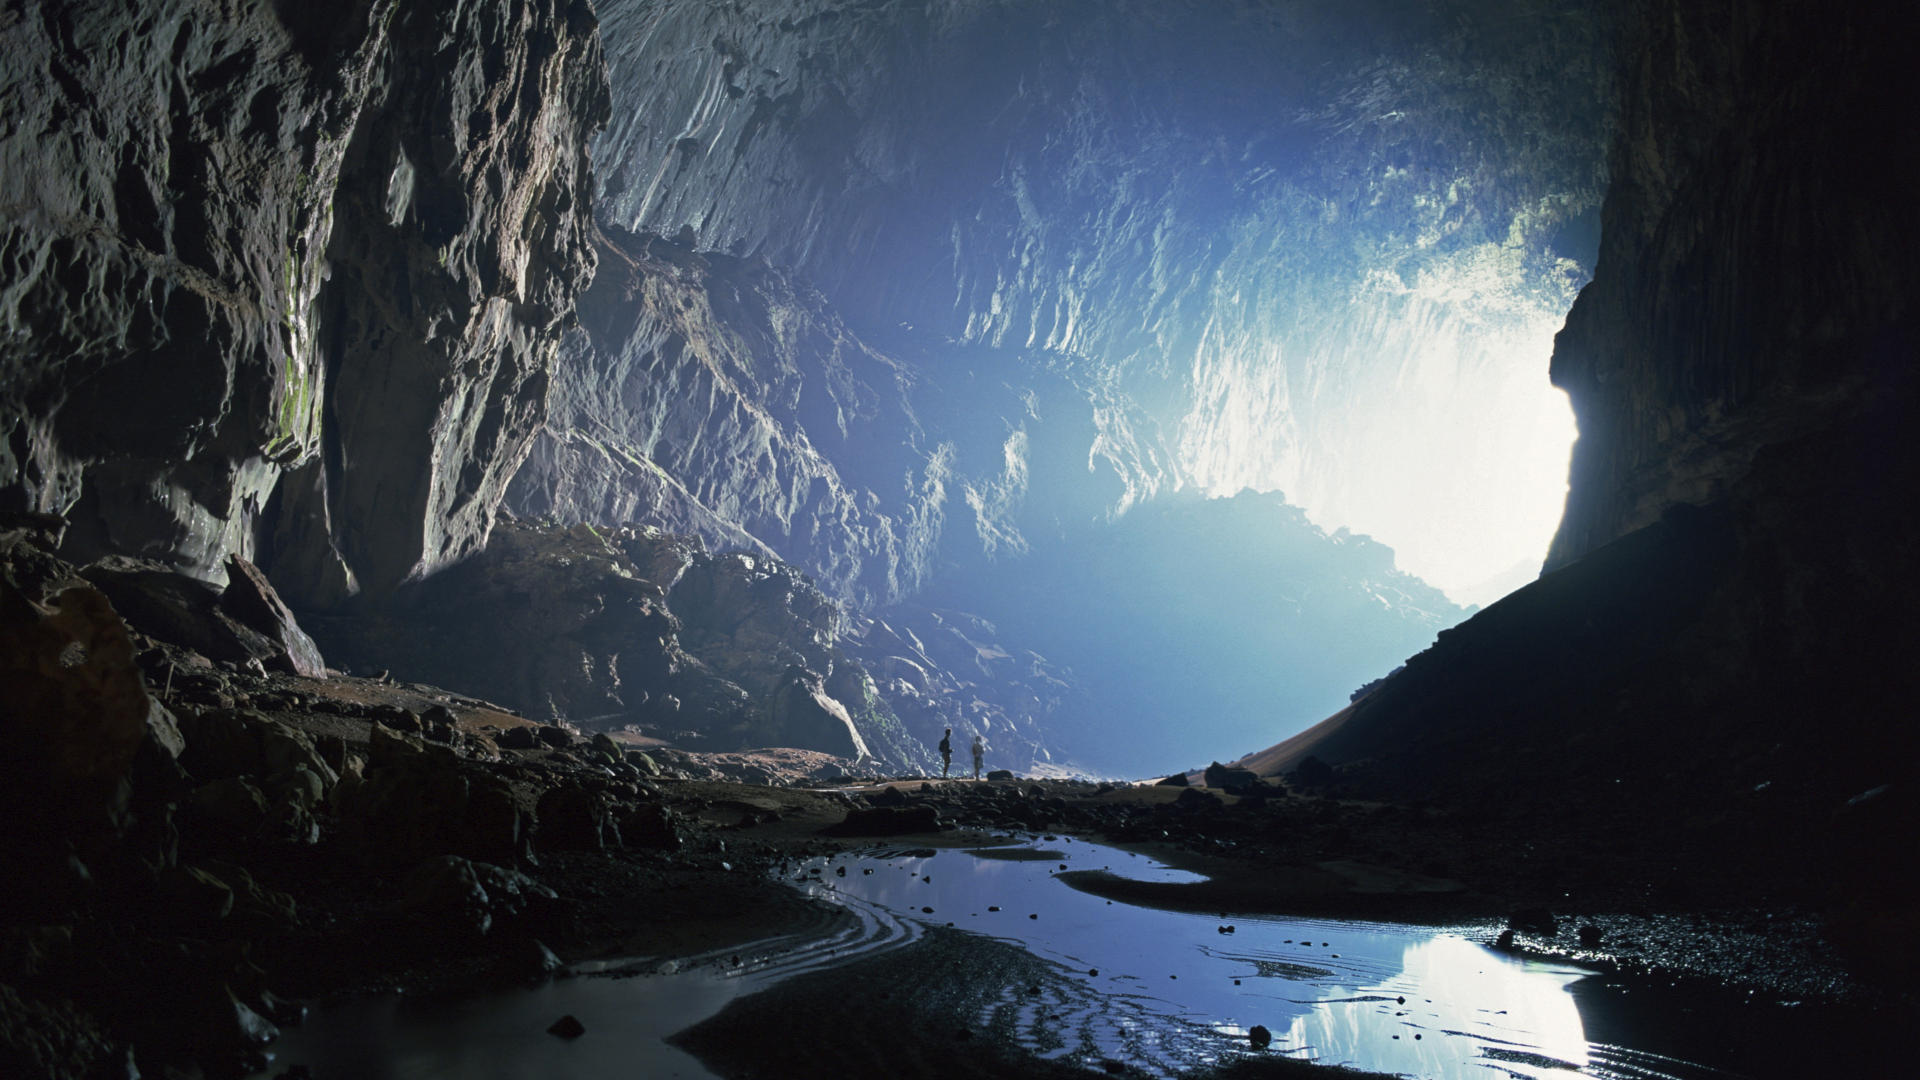 cave-and-water-wallpaper_1920x1080_88448.jpg